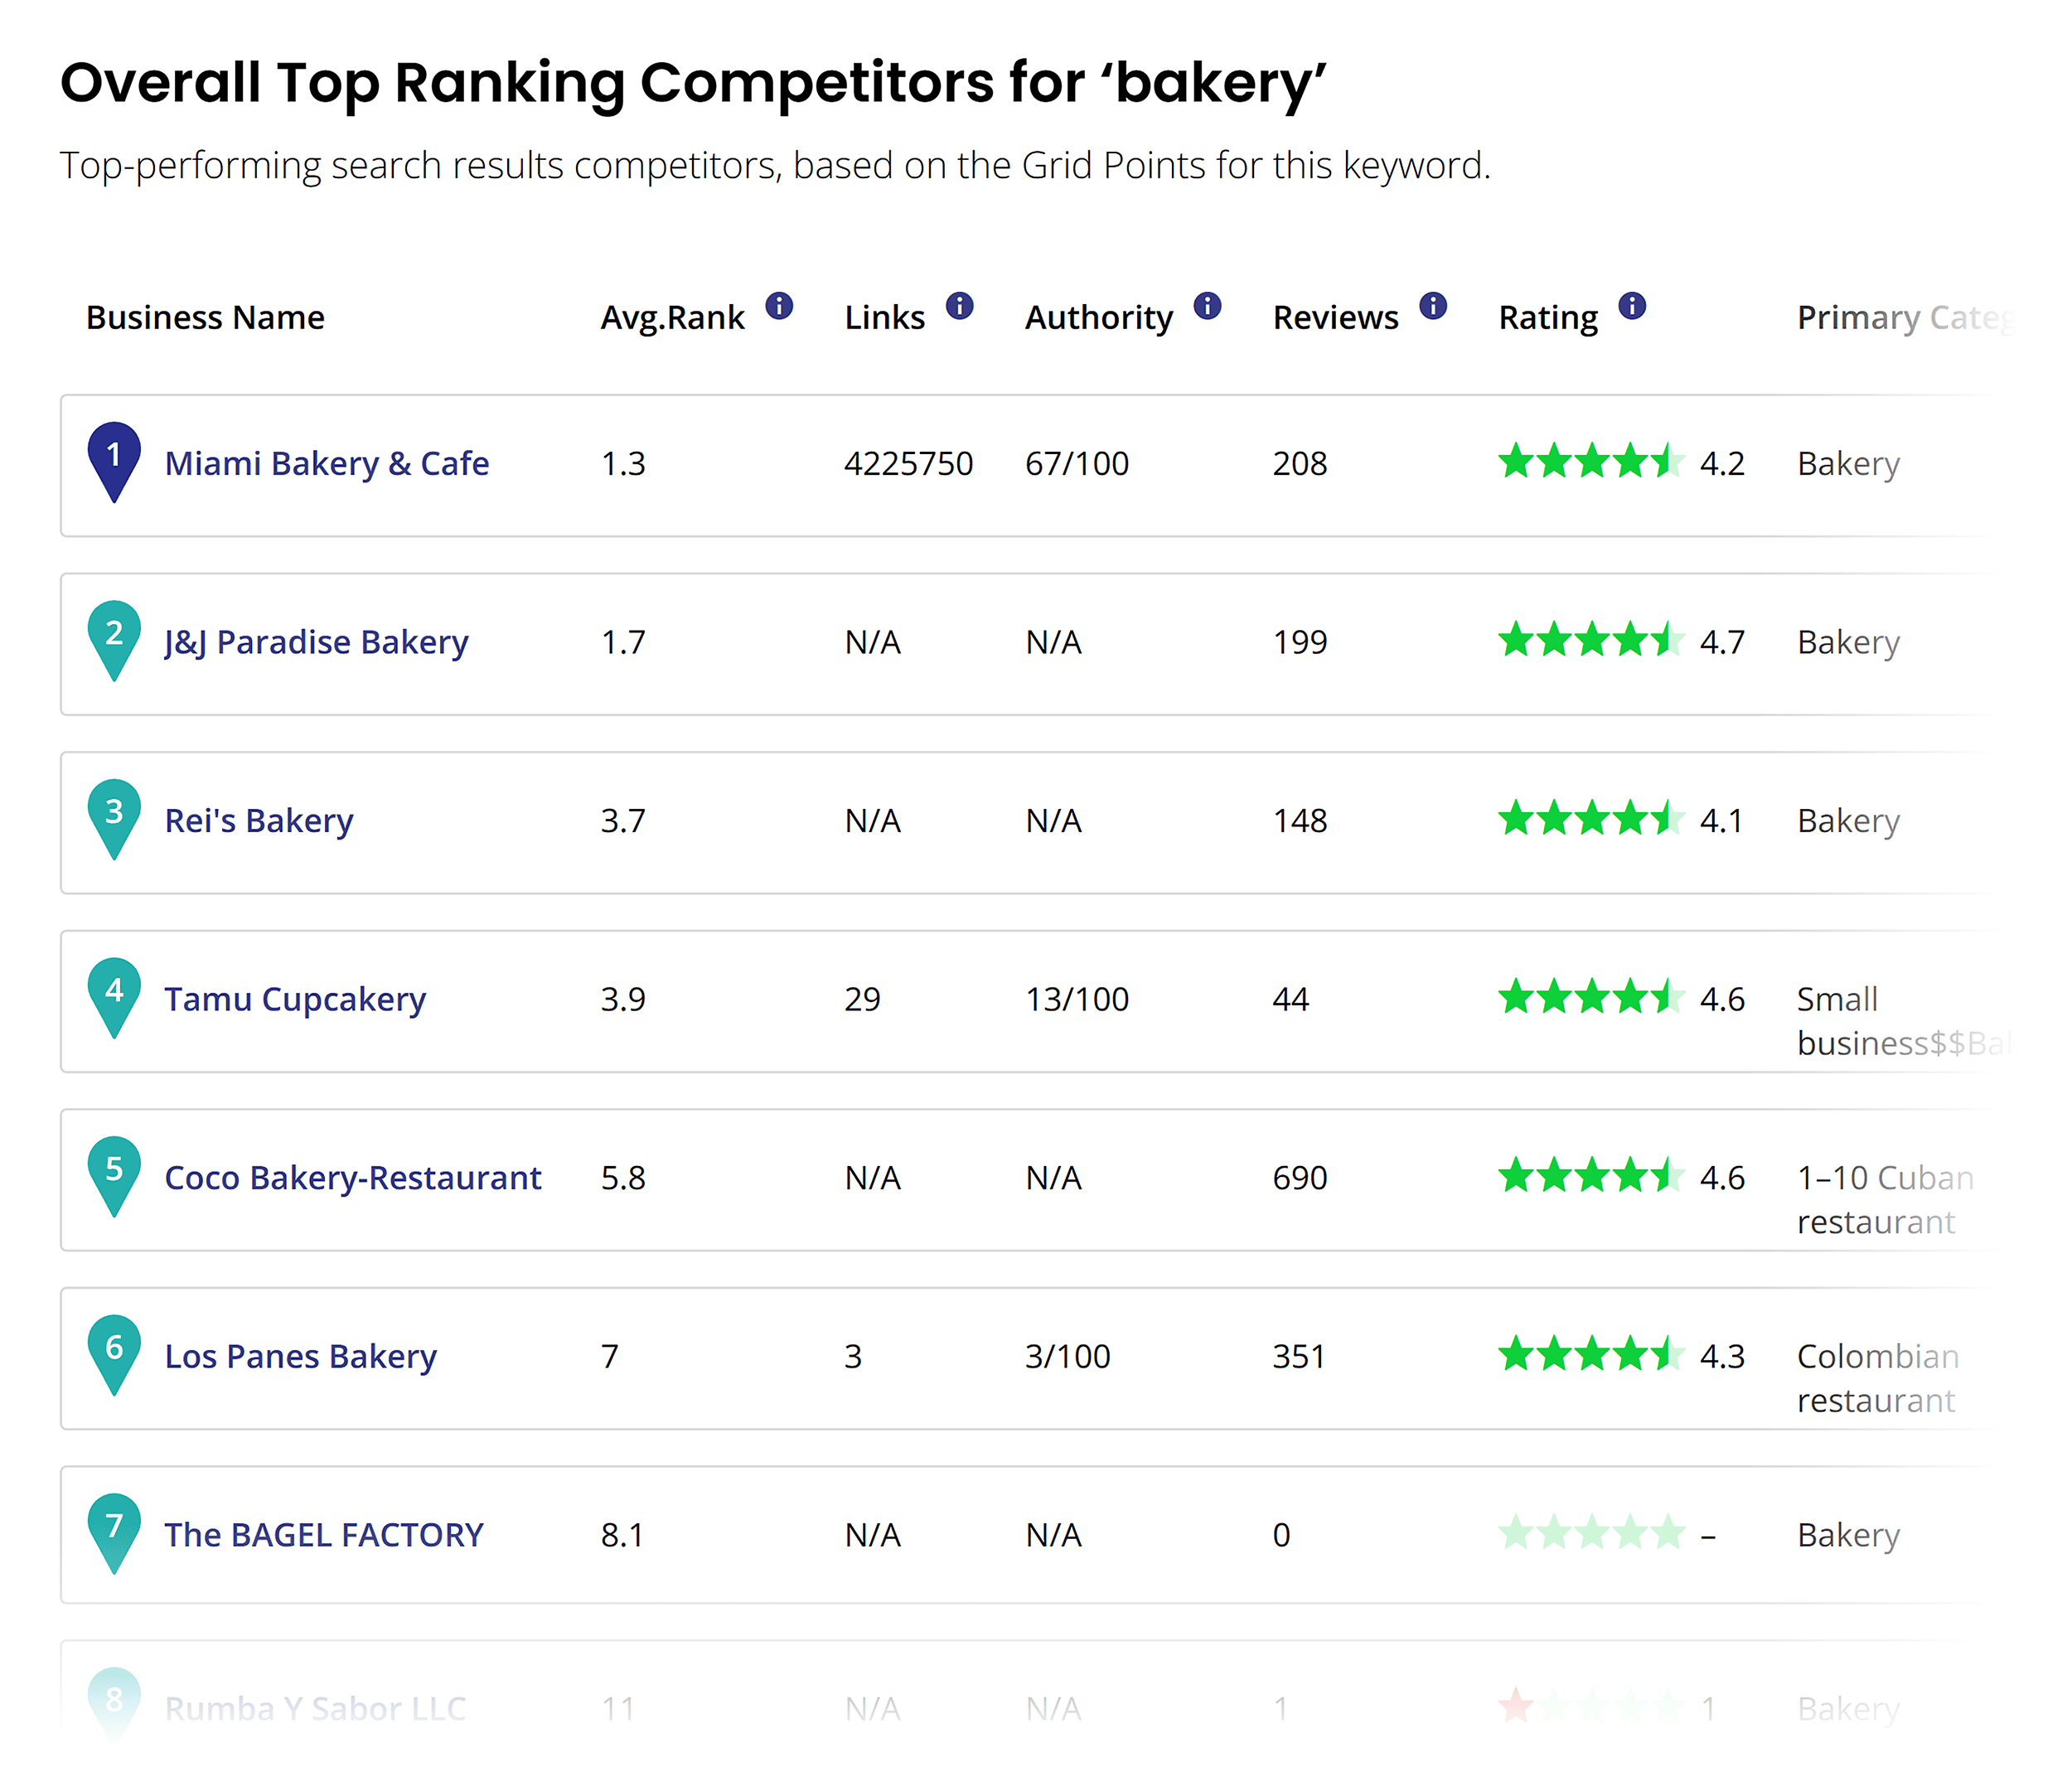 BrightLocal – Overall Top Ranking